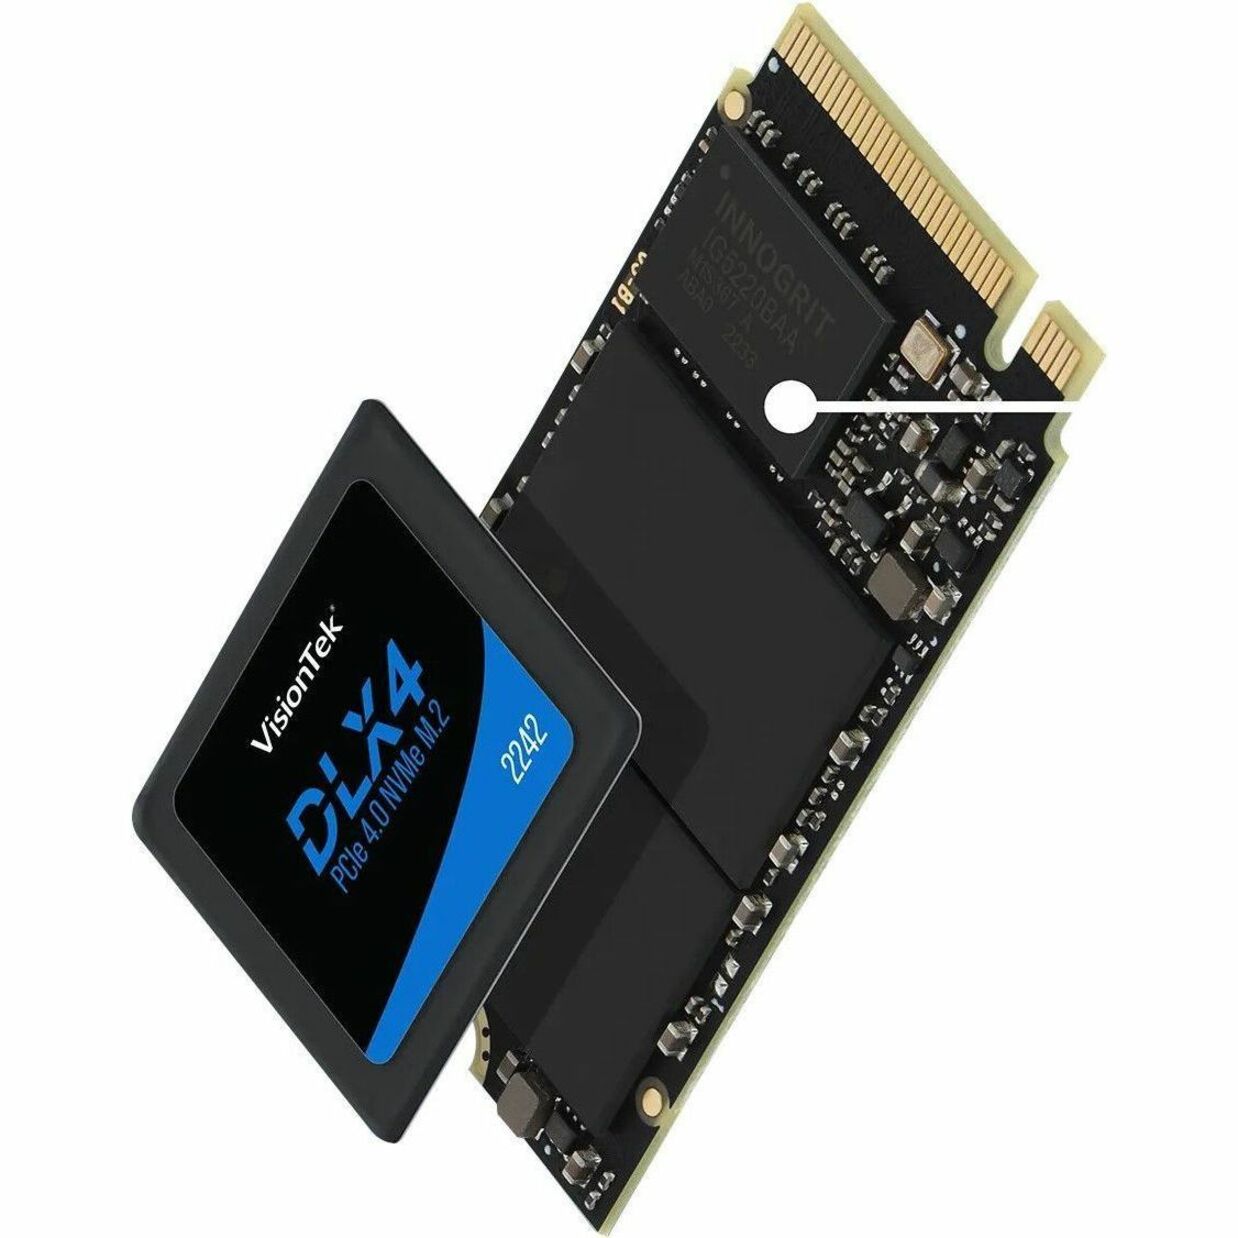 VisionTek 901703 DLX4 2242 M.2 PCIe 4.0 x4 SSD (NVMe) Opal 2.0 SED, 1TB, High Performance Solid State Drive